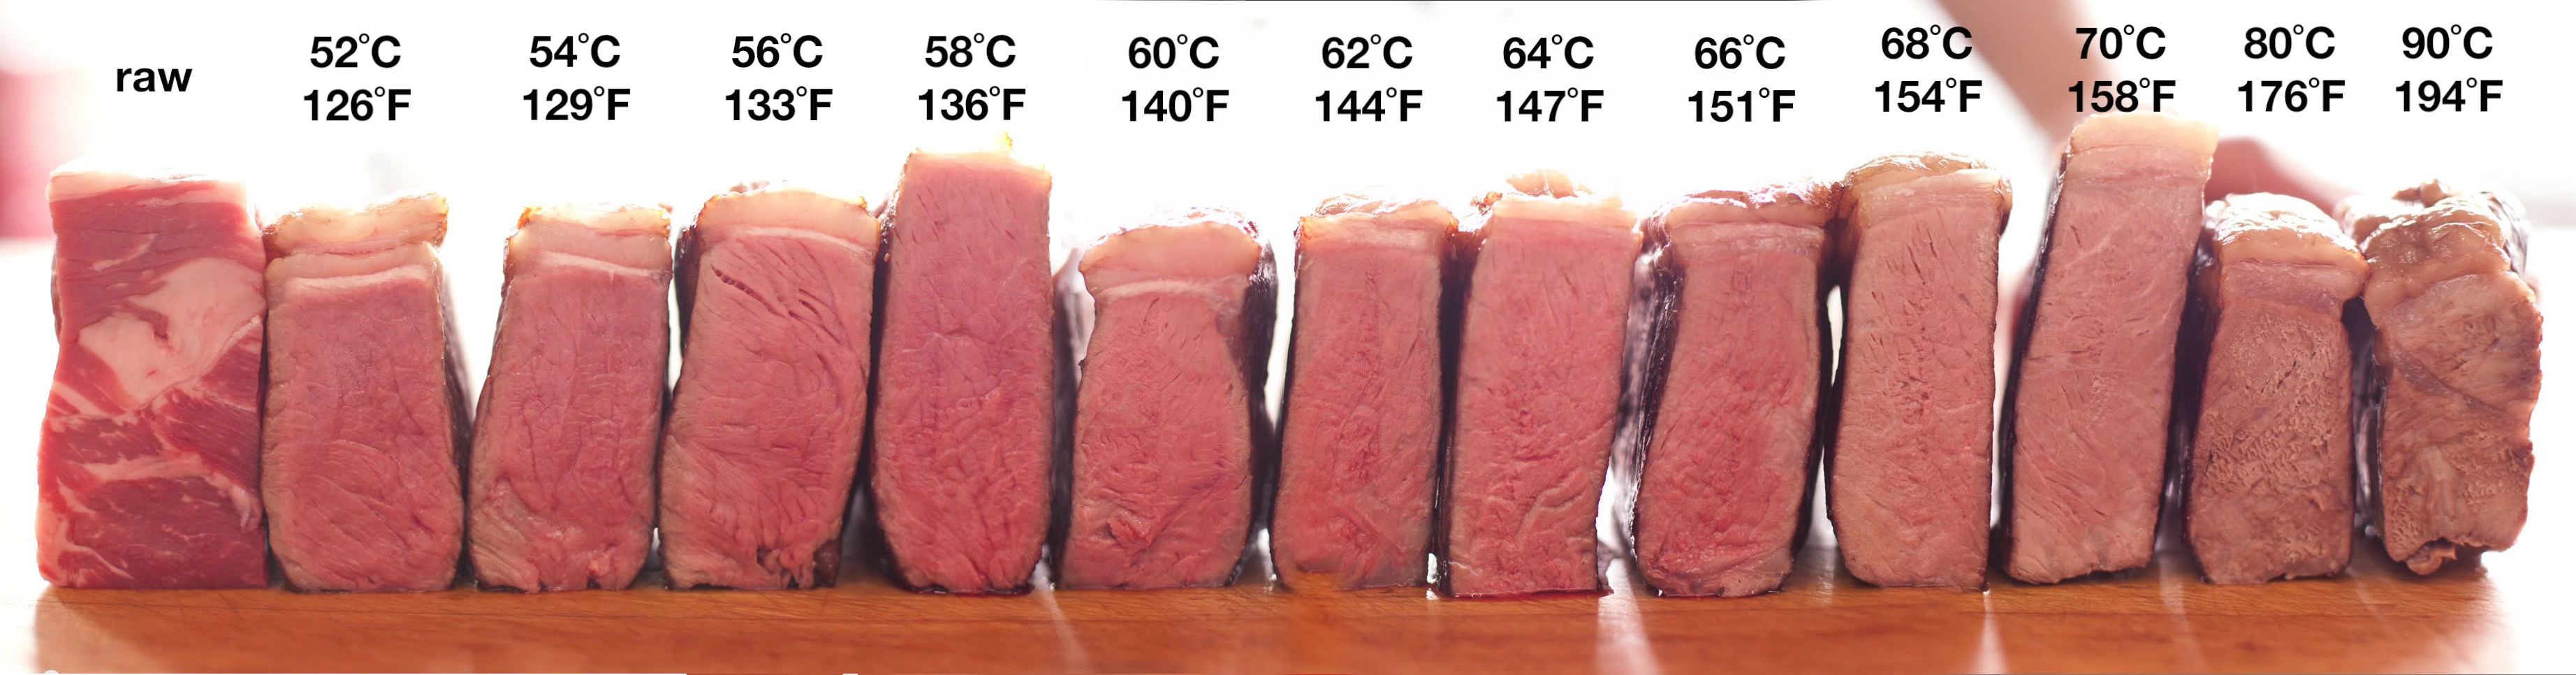 Sous Vide Cooking Temperature Time Chart